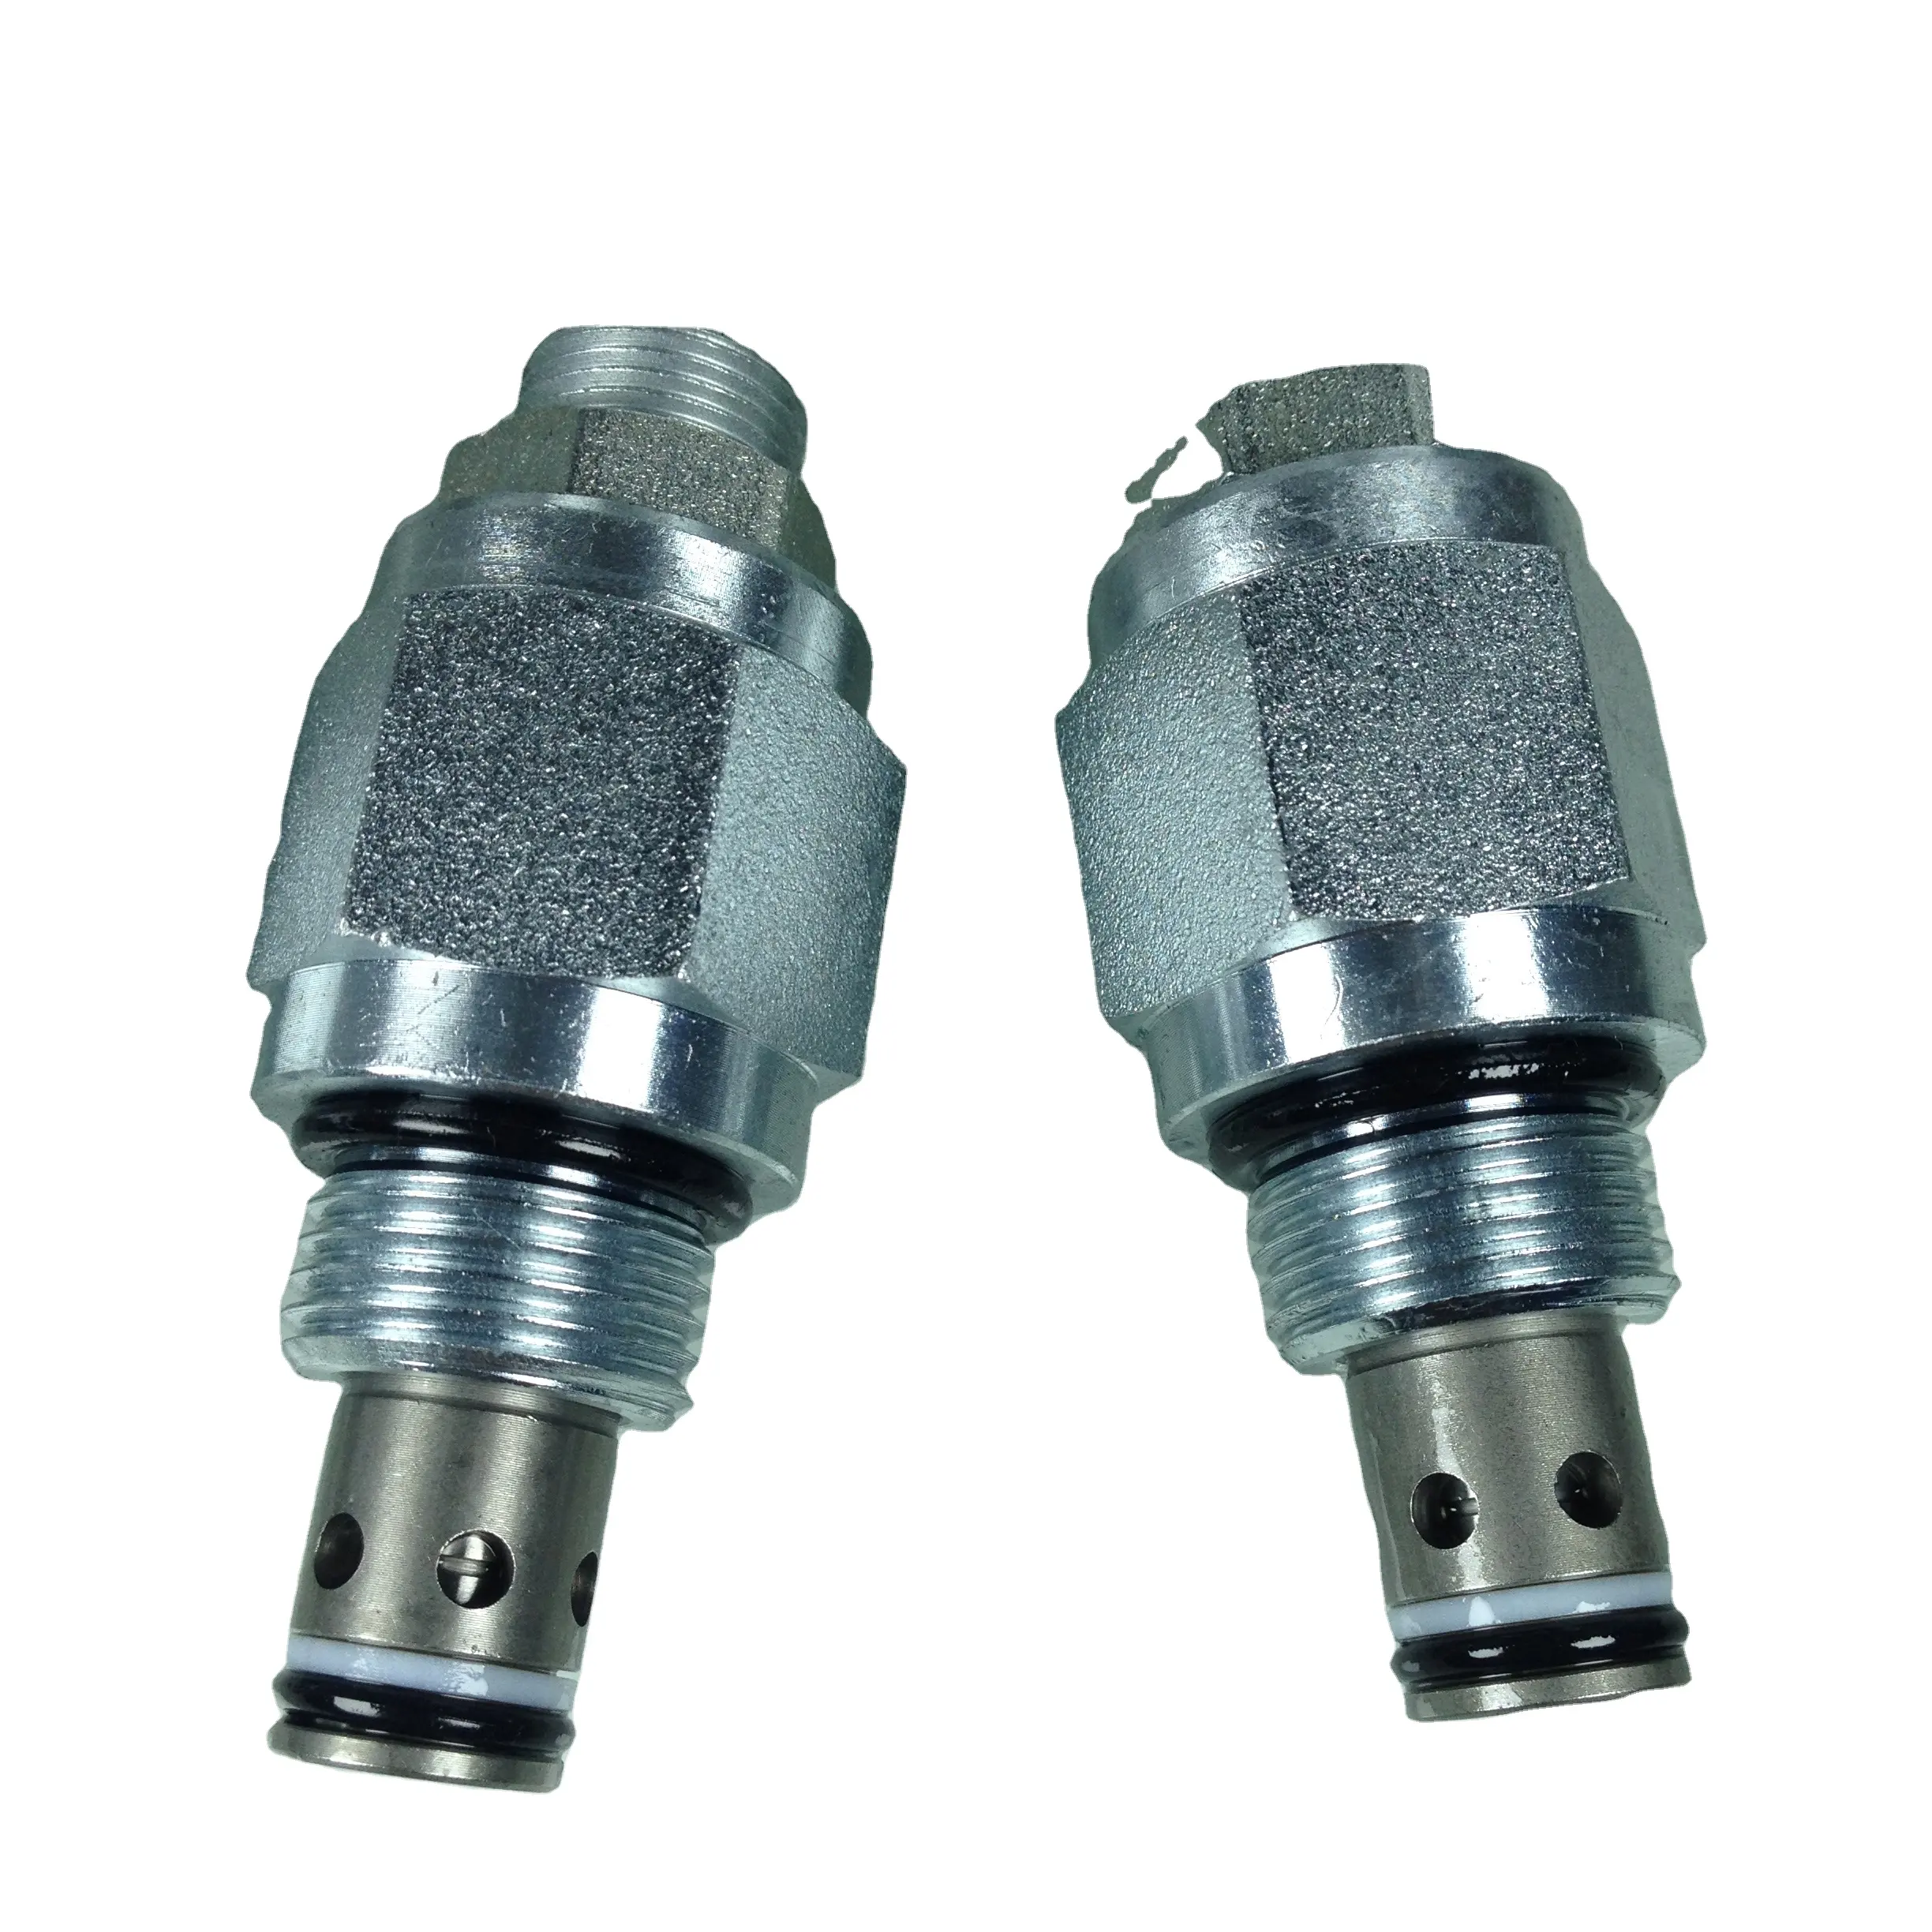 Parker Pilot Operated Relief Valves Safety Duty Applications Great Stability RAH081S50 Threaded Cartridge Hydraulic Valve